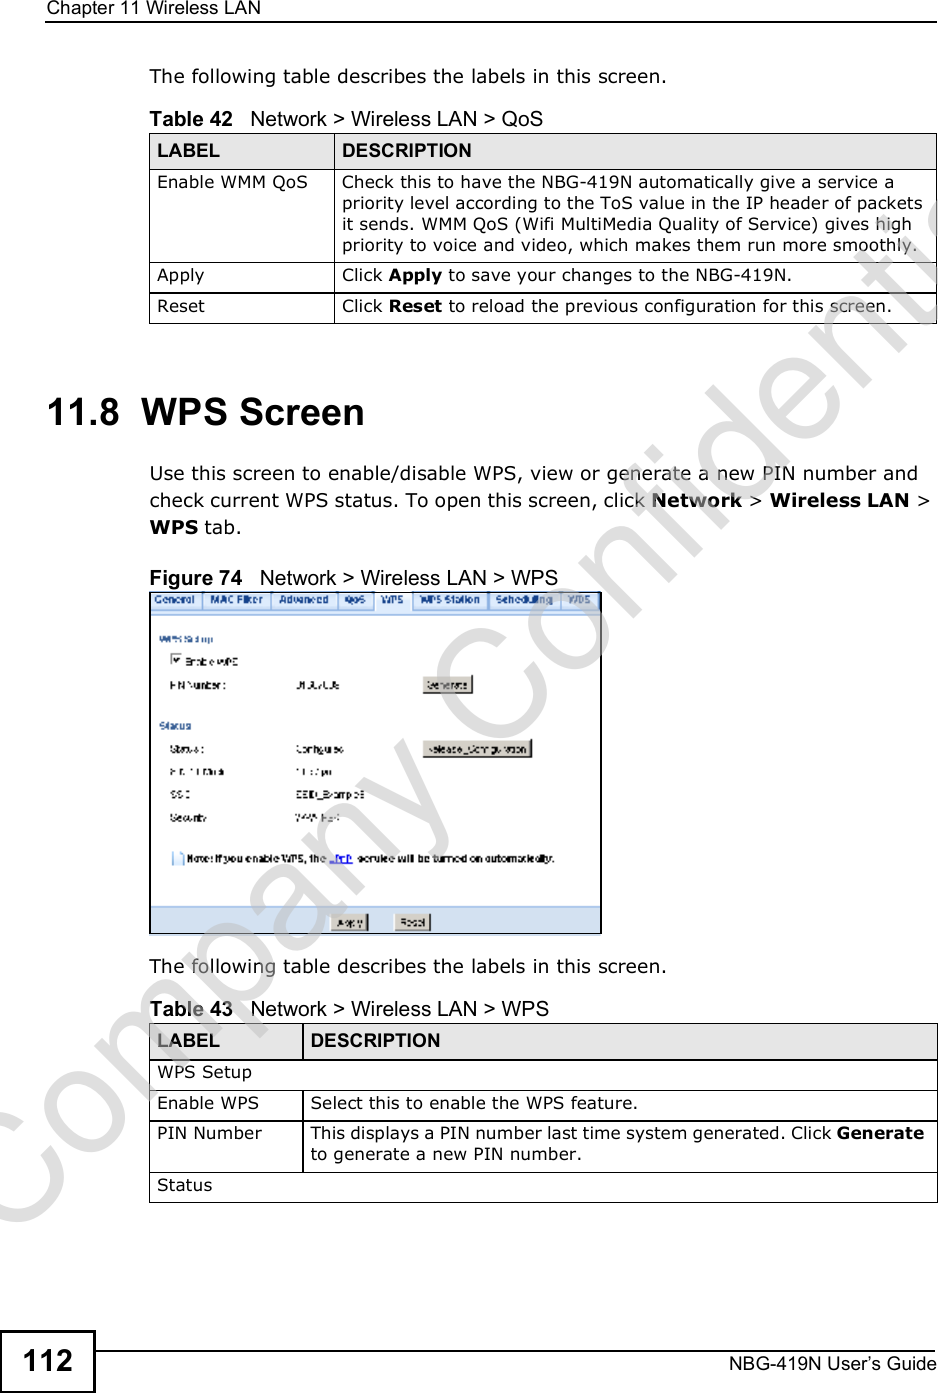 Chapter 11Wireless LANNBG-419N User s Guide112The following table describes the labels in this screen. 11.8  WPS ScreenUse this screen to enable/disable WPS, view or generate a new PIN number and check current WPS status. To open this screen, click Network &gt; Wireless LAN &gt; WPS tab.Figure 74   Network &gt; Wireless LAN &gt; WPSThe following table describes the labels in this screen.Table 42   Network &gt; Wireless LAN &gt; QoSLABEL DESCRIPTIONEnable WMM QoSCheck this to have the NBG-419N automatically give a service a priority level according to the ToS value in the IP header of packets it sends. WMM QoS (Wifi MultiMedia Quality of Service) gives high priority to voice and video, which makes them run more smoothly.Apply Click Apply to save your changes to the NBG-419N.Reset Click Reset to reload the previous configuration for this screen.Table 43   Network &gt; Wireless LAN &gt; WPSLABEL DESCRIPTIONWPS SetupEnable WPS Select this to enable the WPS feature.PIN Number This displays a PIN number last time system generated. Click Generate to generate a new PIN number.StatusCompany Confidential